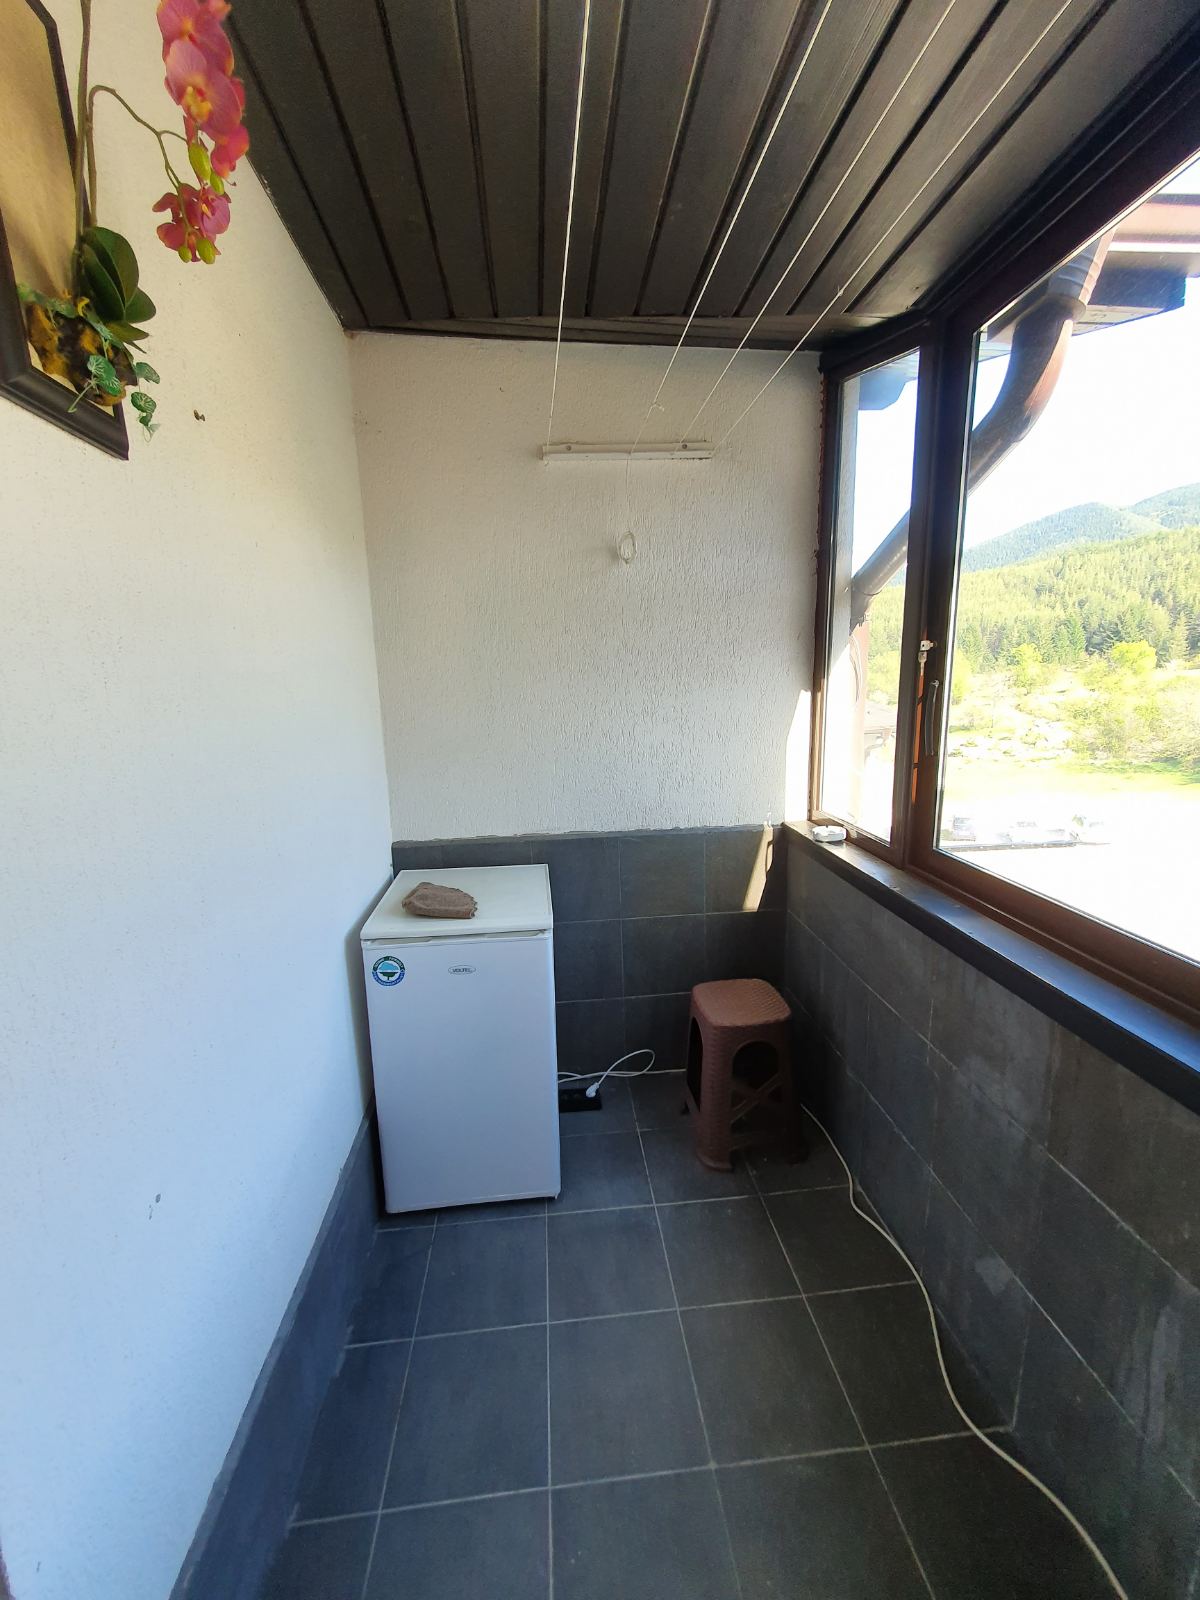 Furnished studio with a view of Mount Todorka and Green Life, Bansko